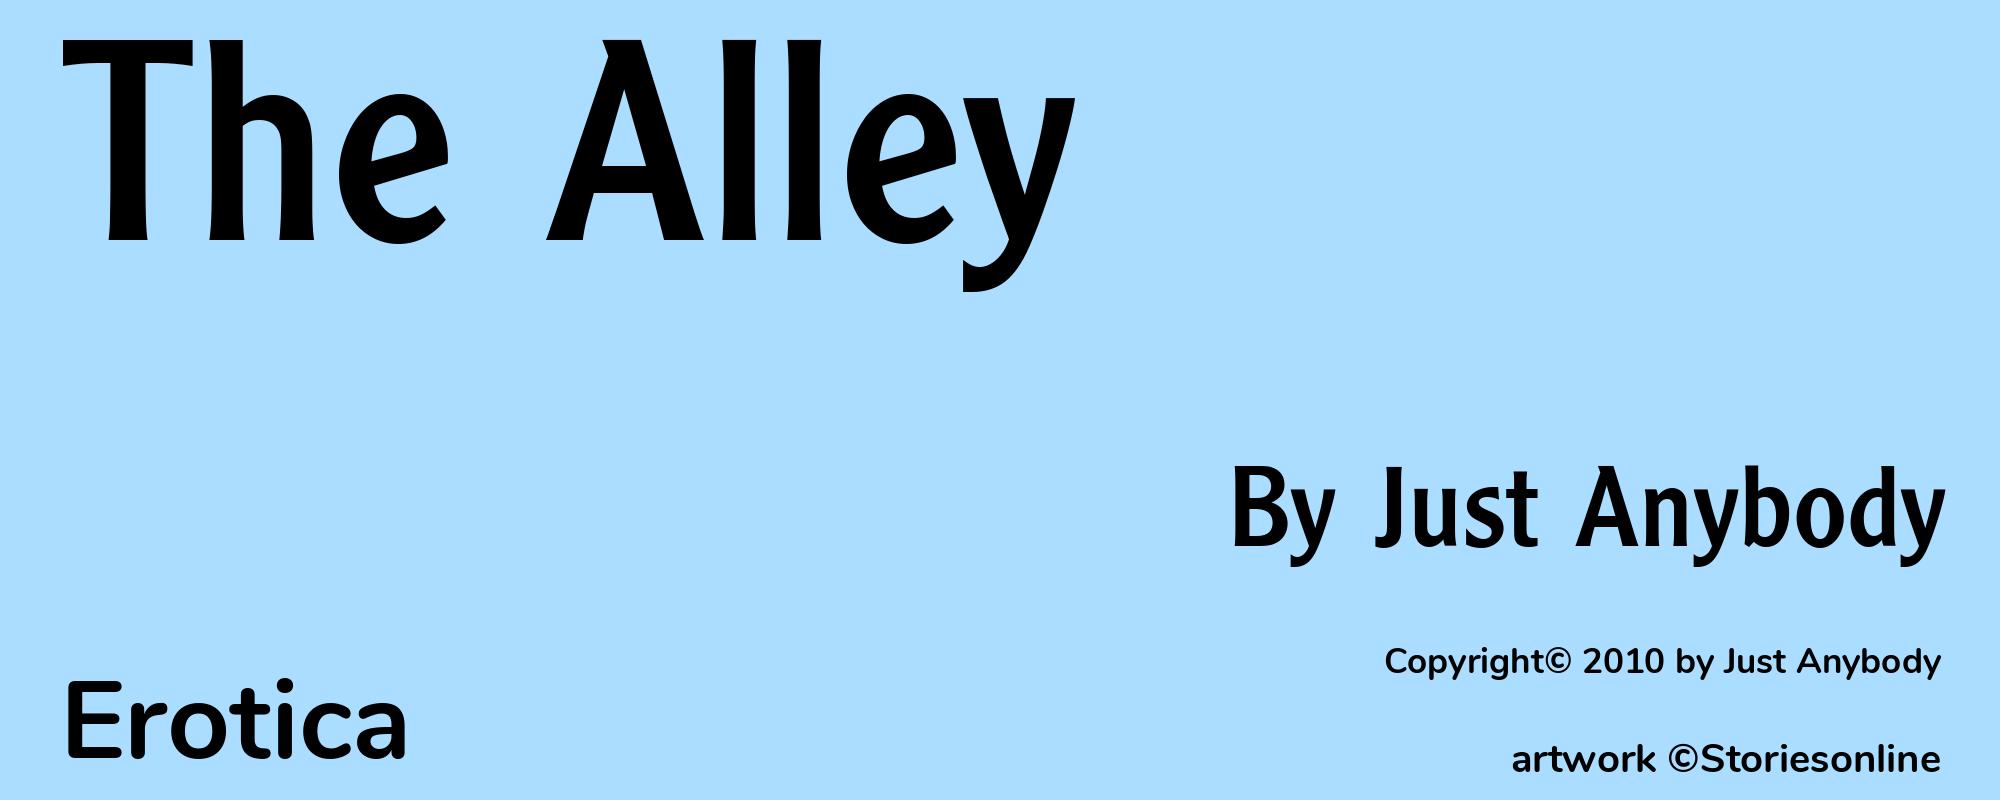 The Alley - Cover